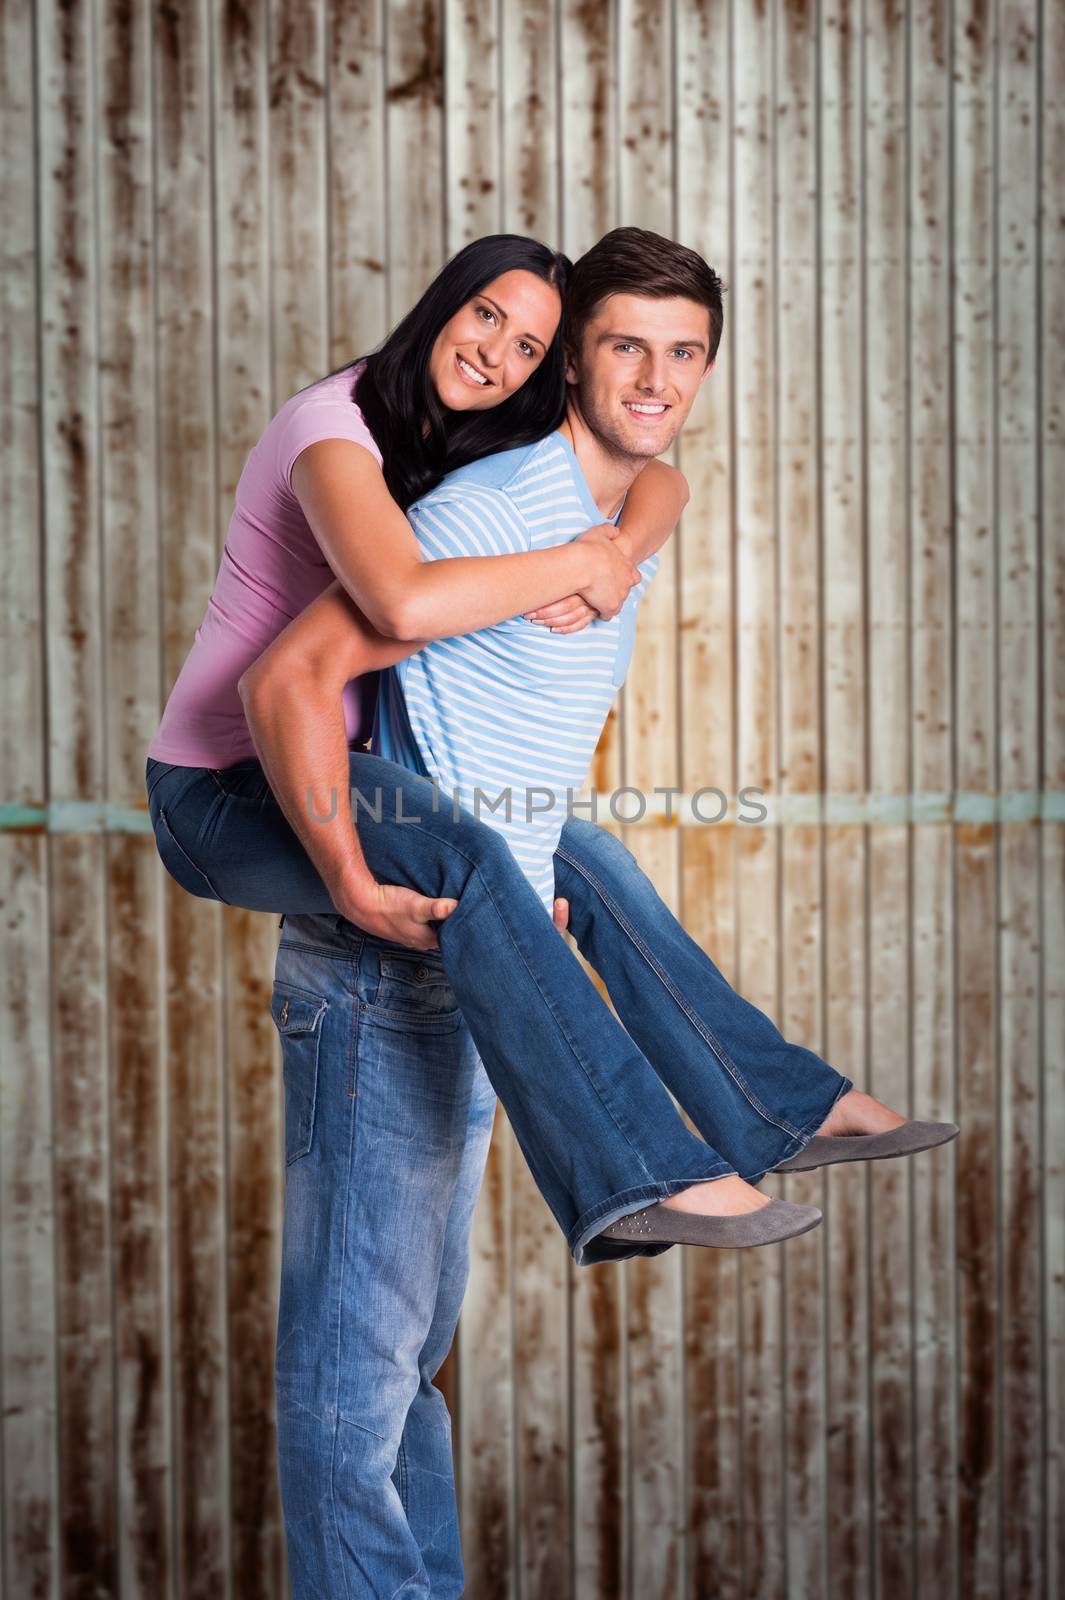 Composite image of young man giving girlfriend a piggyback ride by Wavebreakmedia